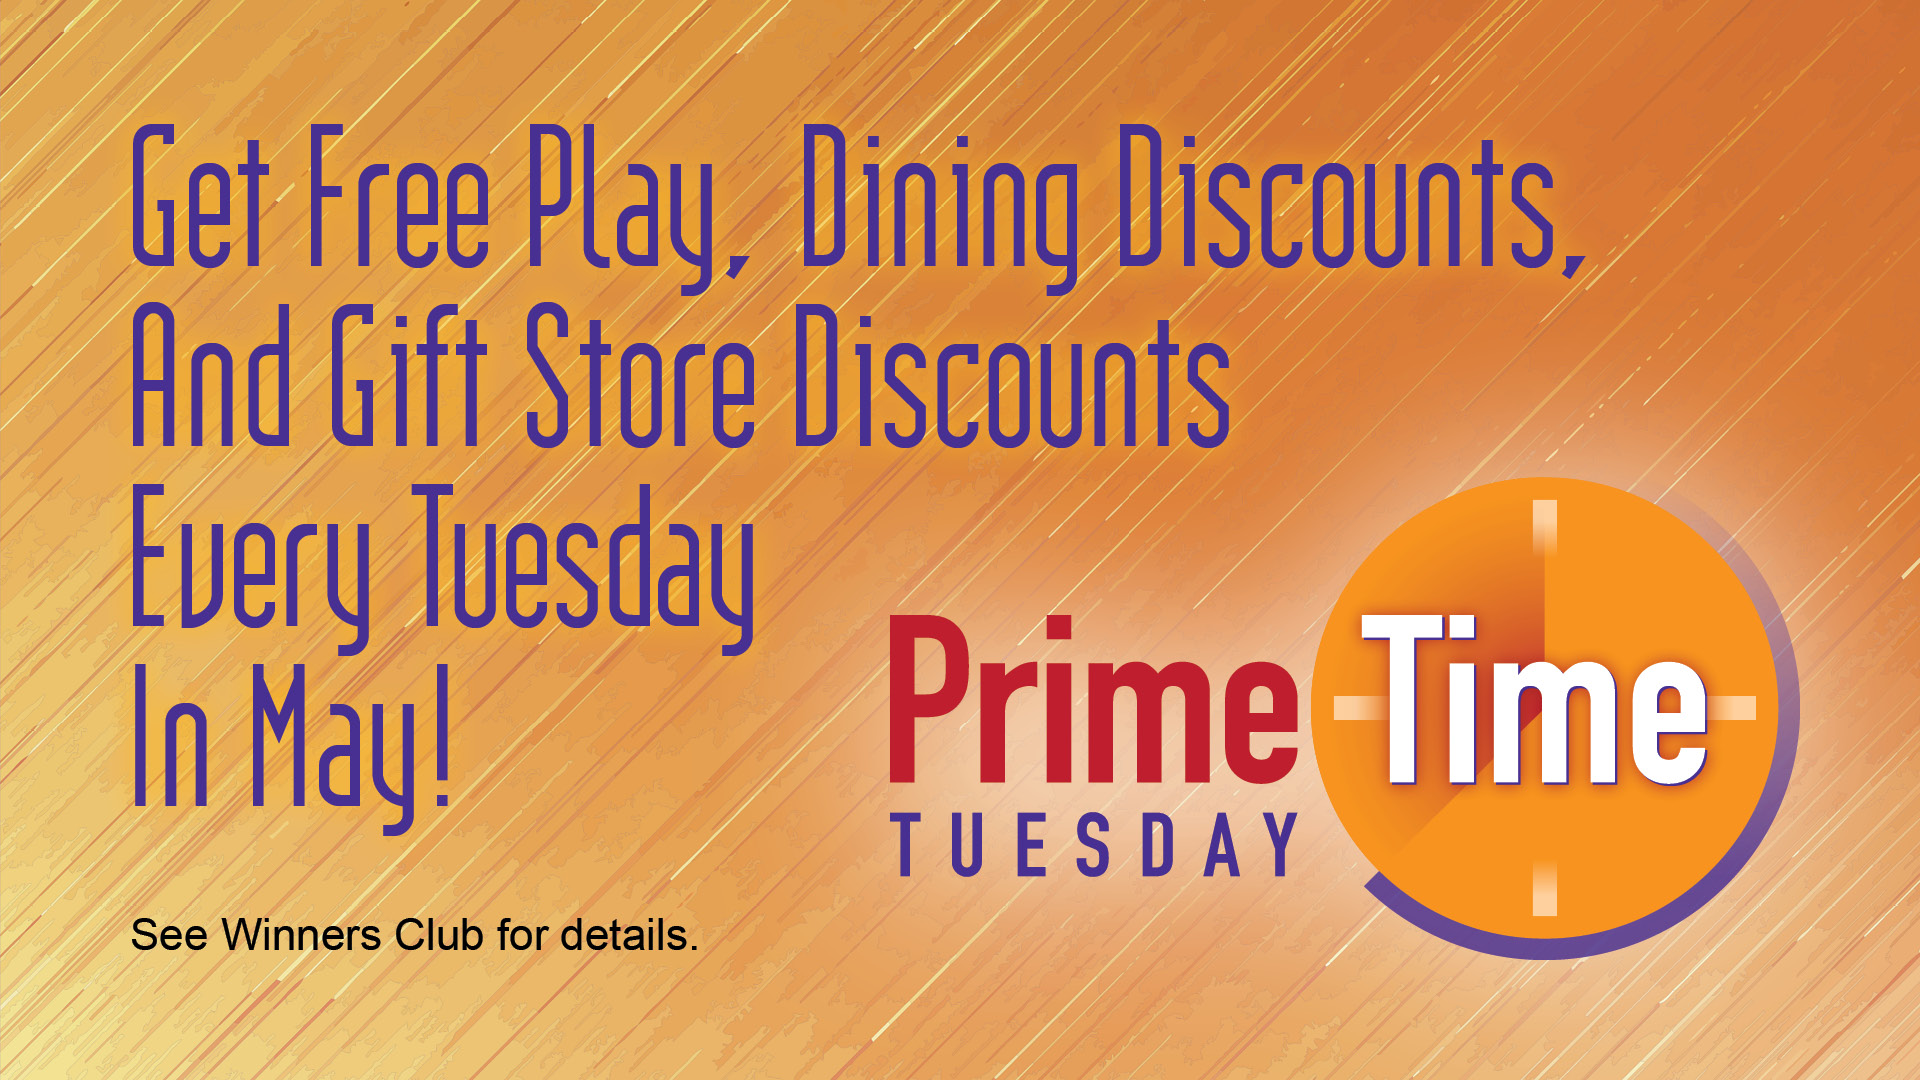 Prime Time Tuesday - Get free play, dining discounts, and gift store discounts every Tuesday in May! See Winners Club for details.